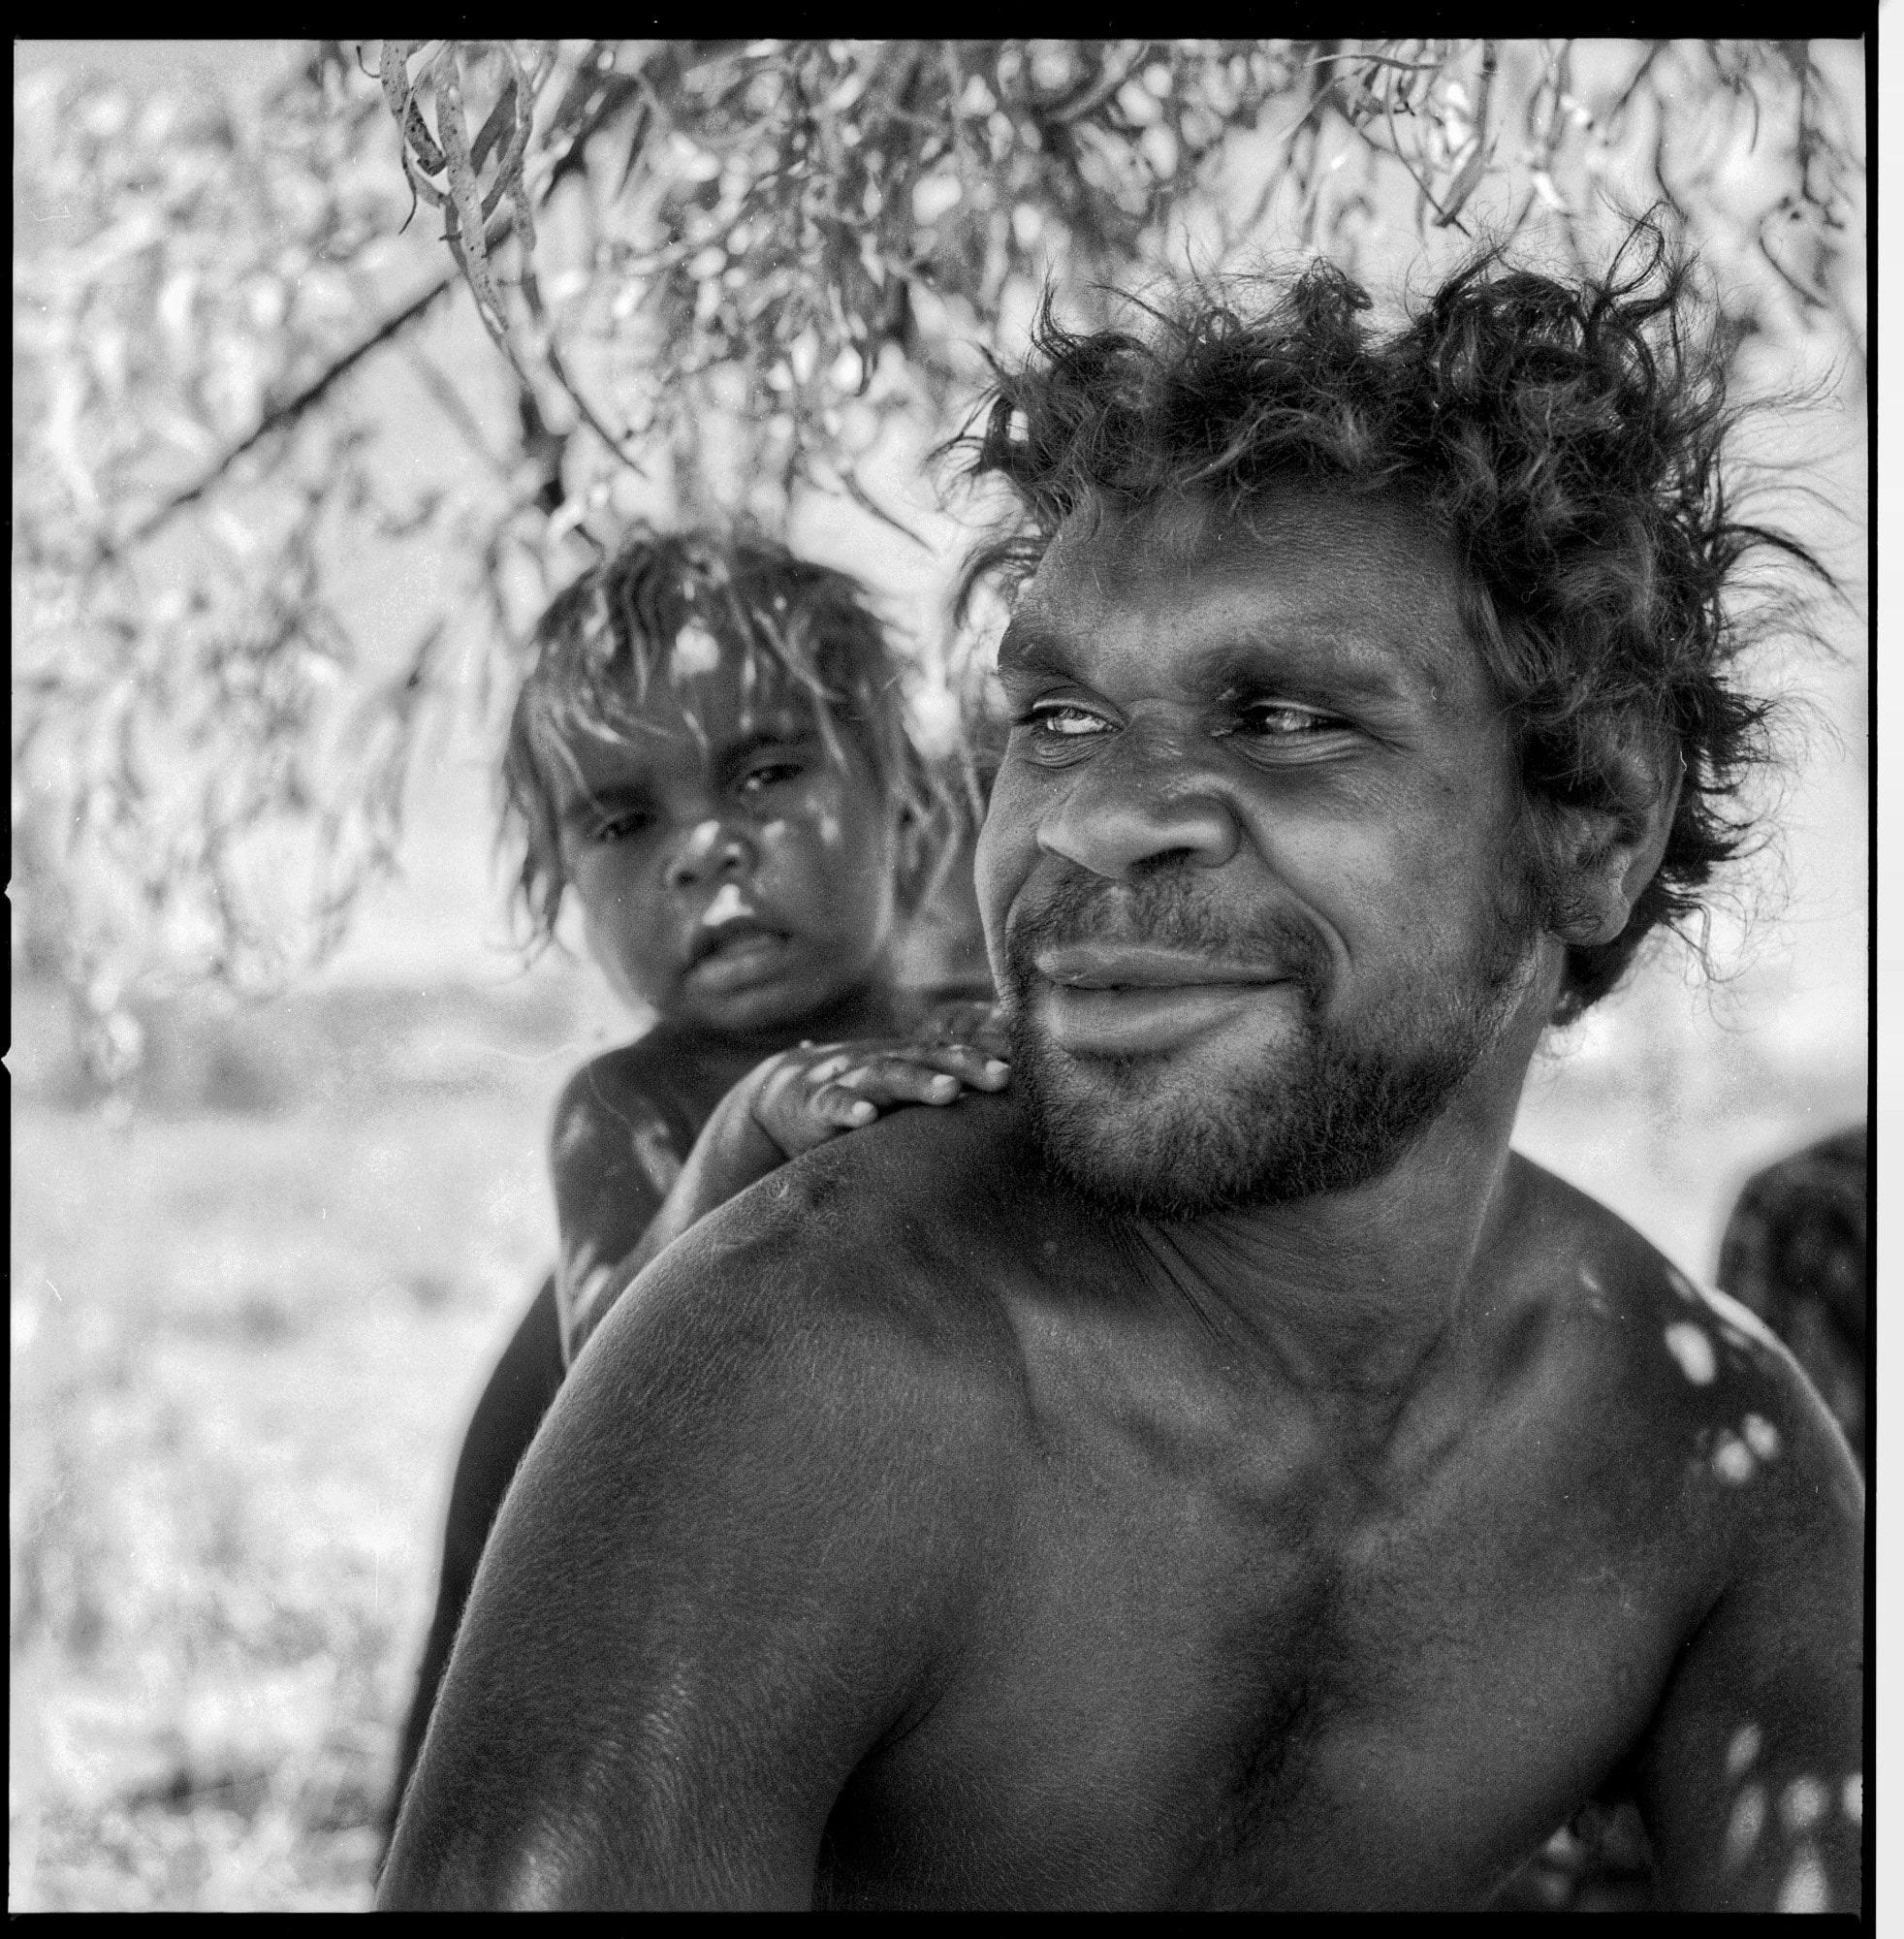 "Time travelers along the highway" project 2020 by Michael Klinkhamer. Portrait photography of Aborigines